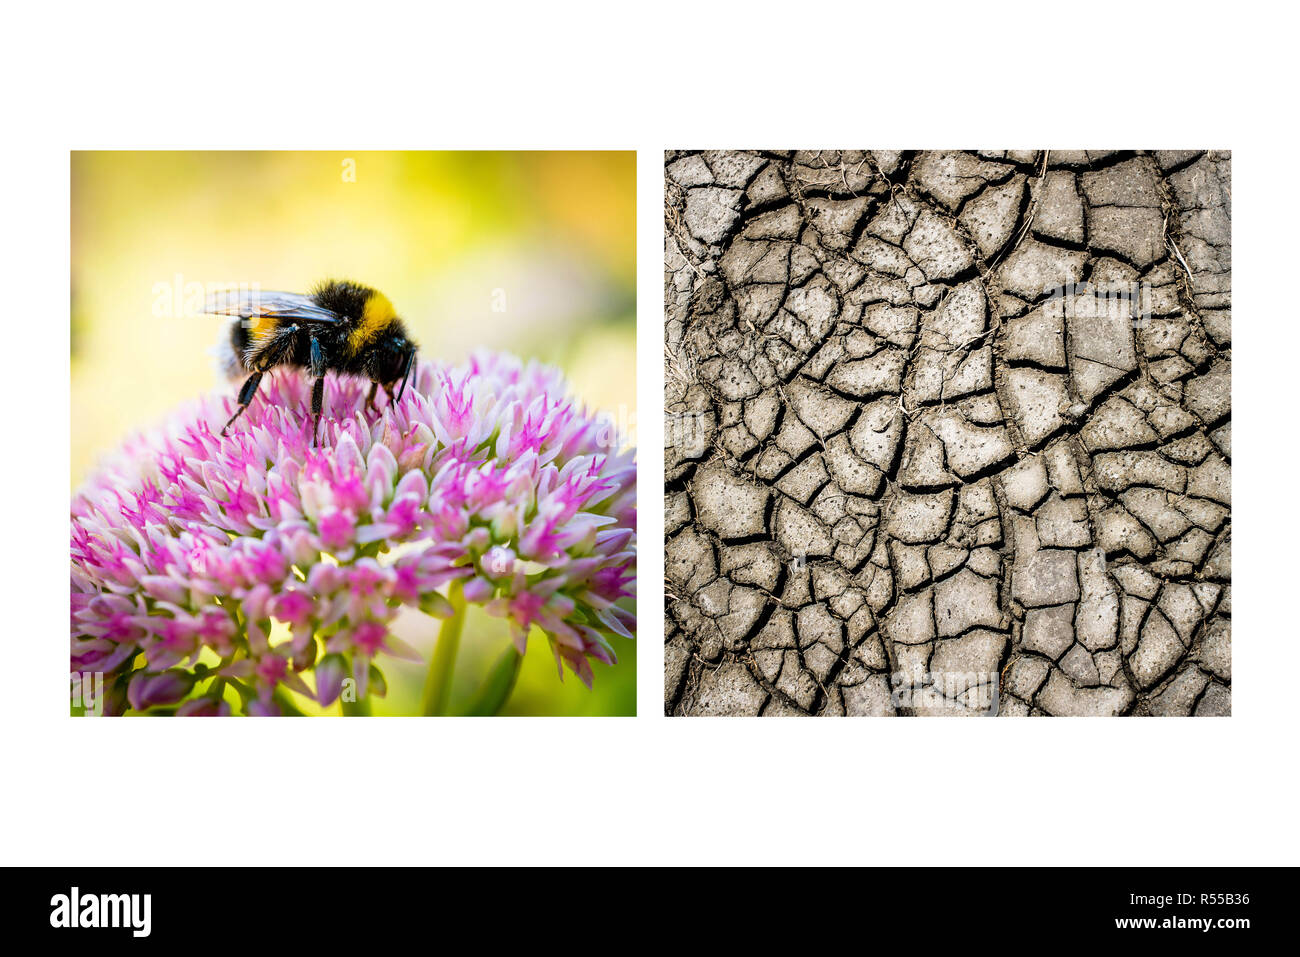 Bumblebee foraging a flower and cracked mud, Illustration on climate change. Stock Photo